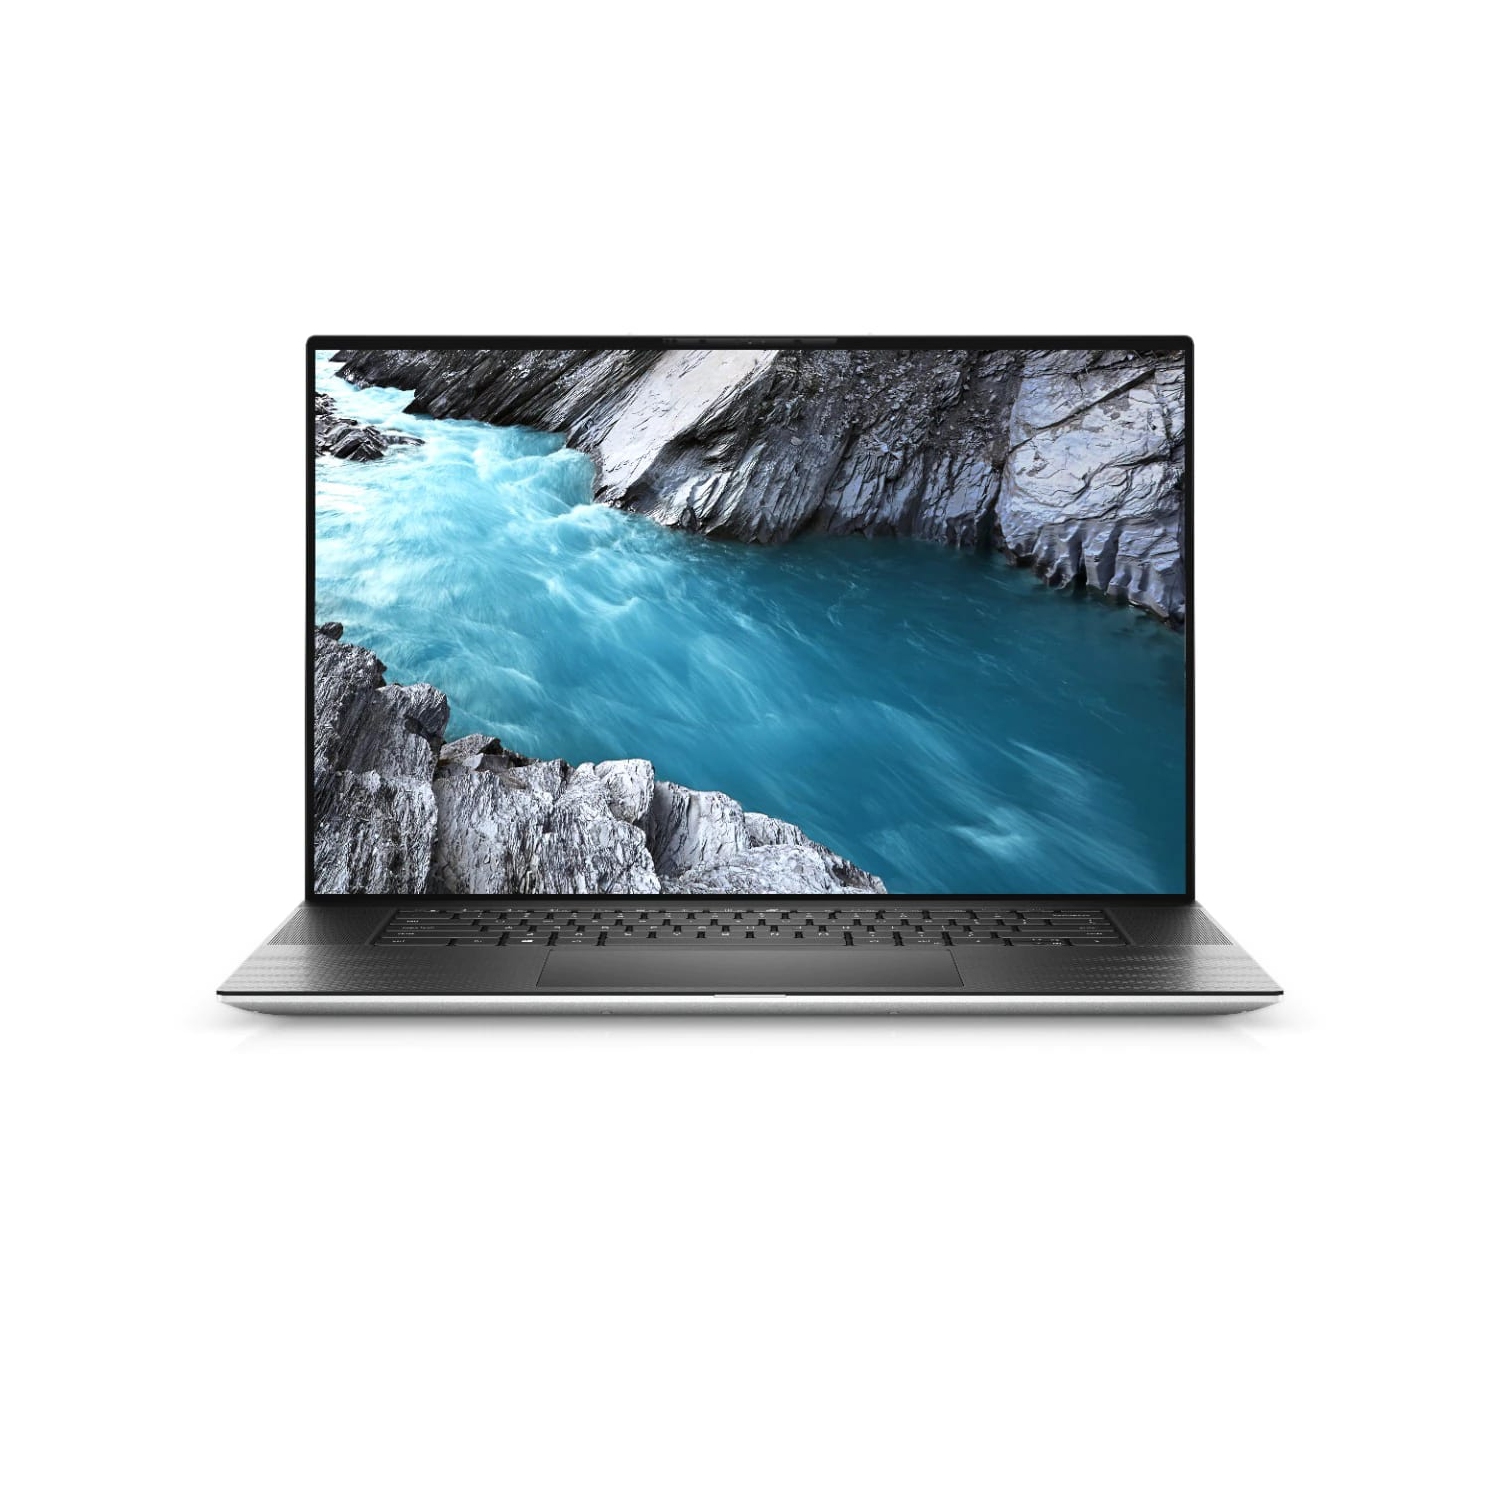 Refurbished (Excellent) - Dell XPS 17 9700 Laptop (2020) | 17" FHD+ | Core i9 - 1TB SSD - 32GB RAM - RTX 2060 | 8 Cores @ 5.3 GHz - 10th Gen CPU Certified Refurbished